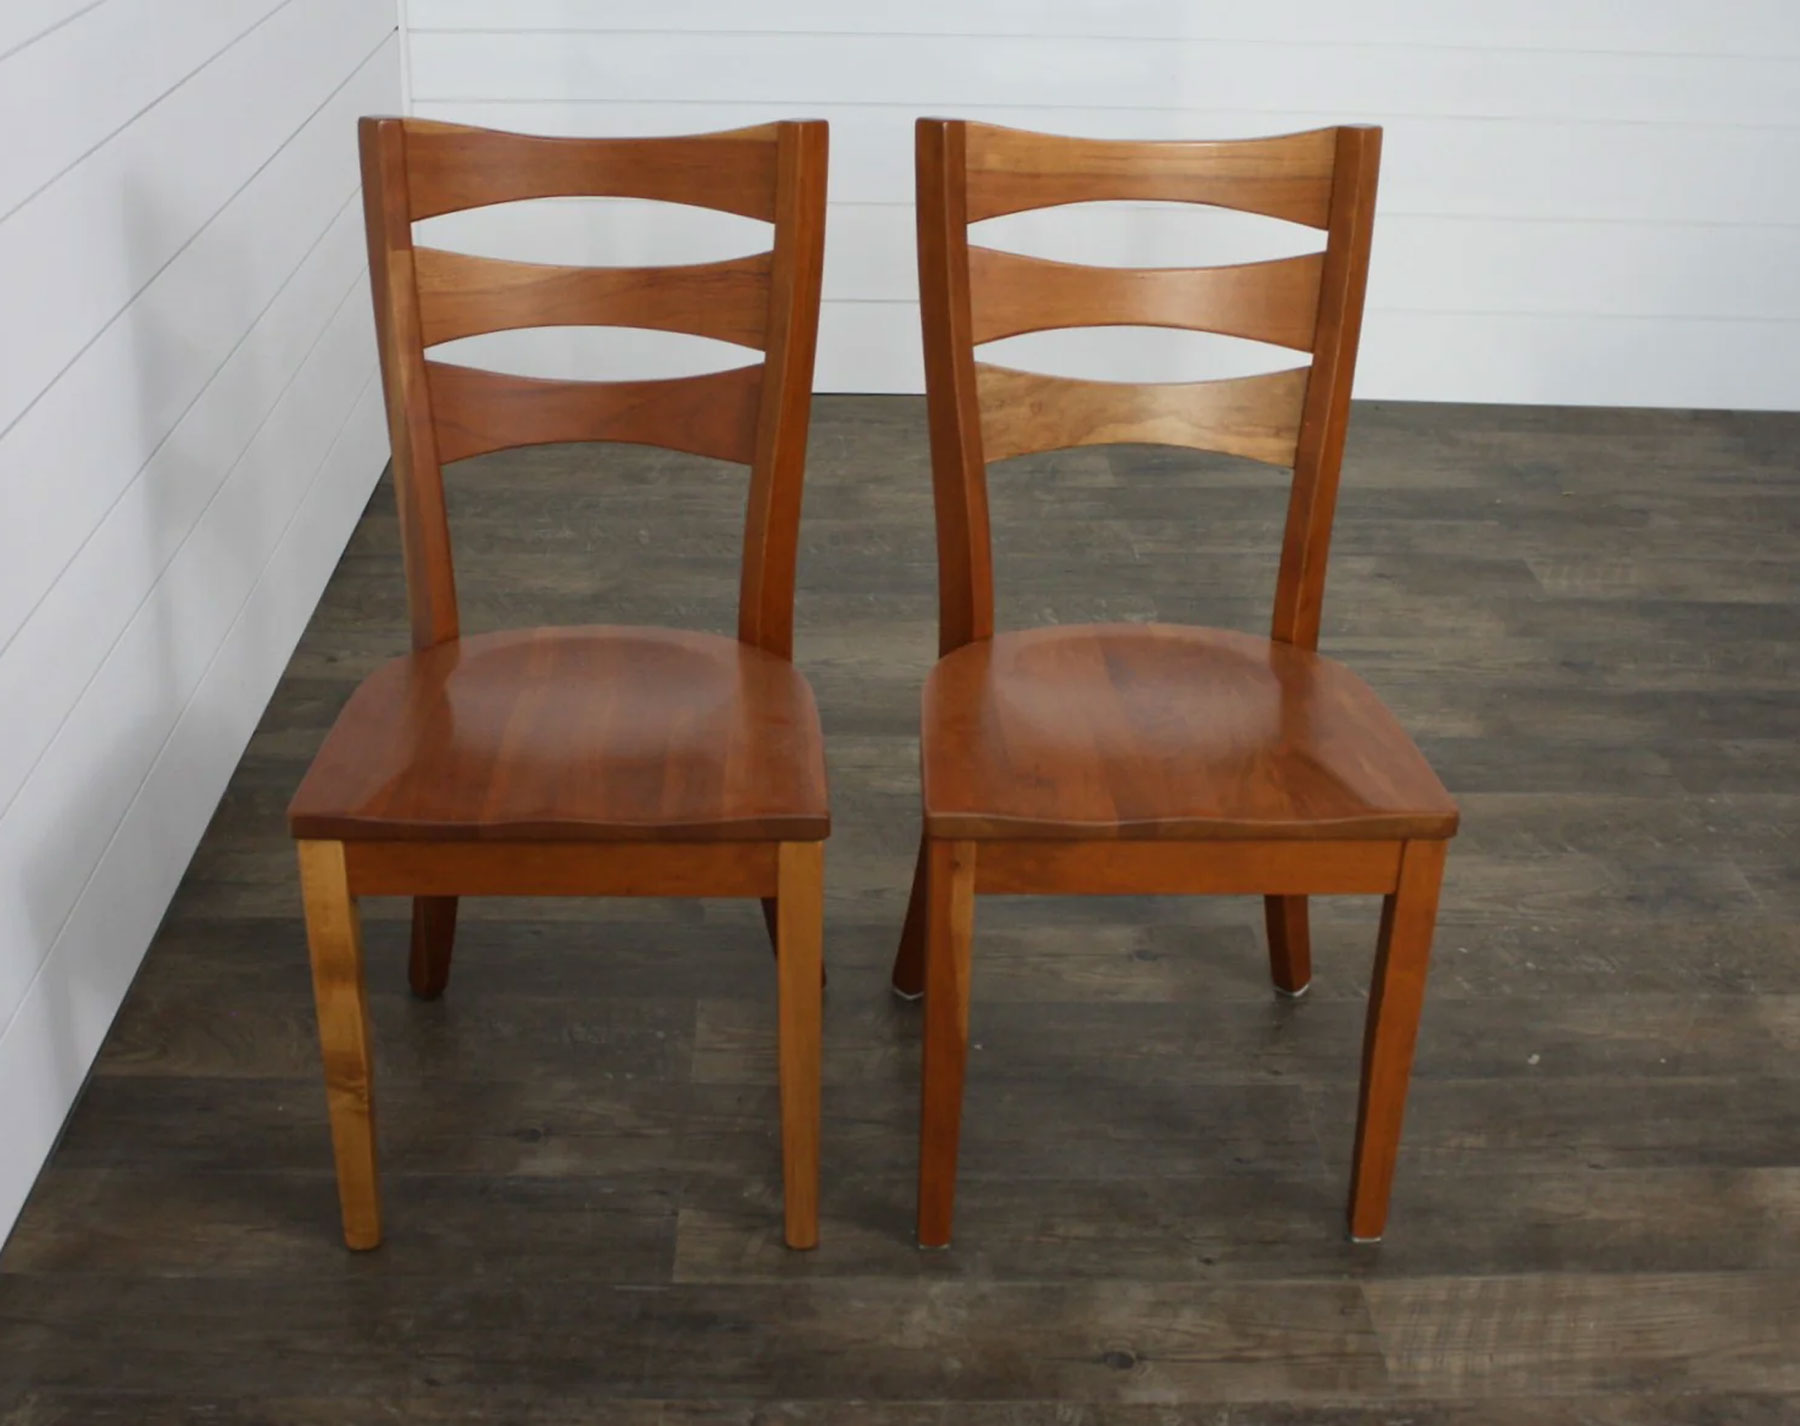 (2) Sierra Dining Chairs in Cherry